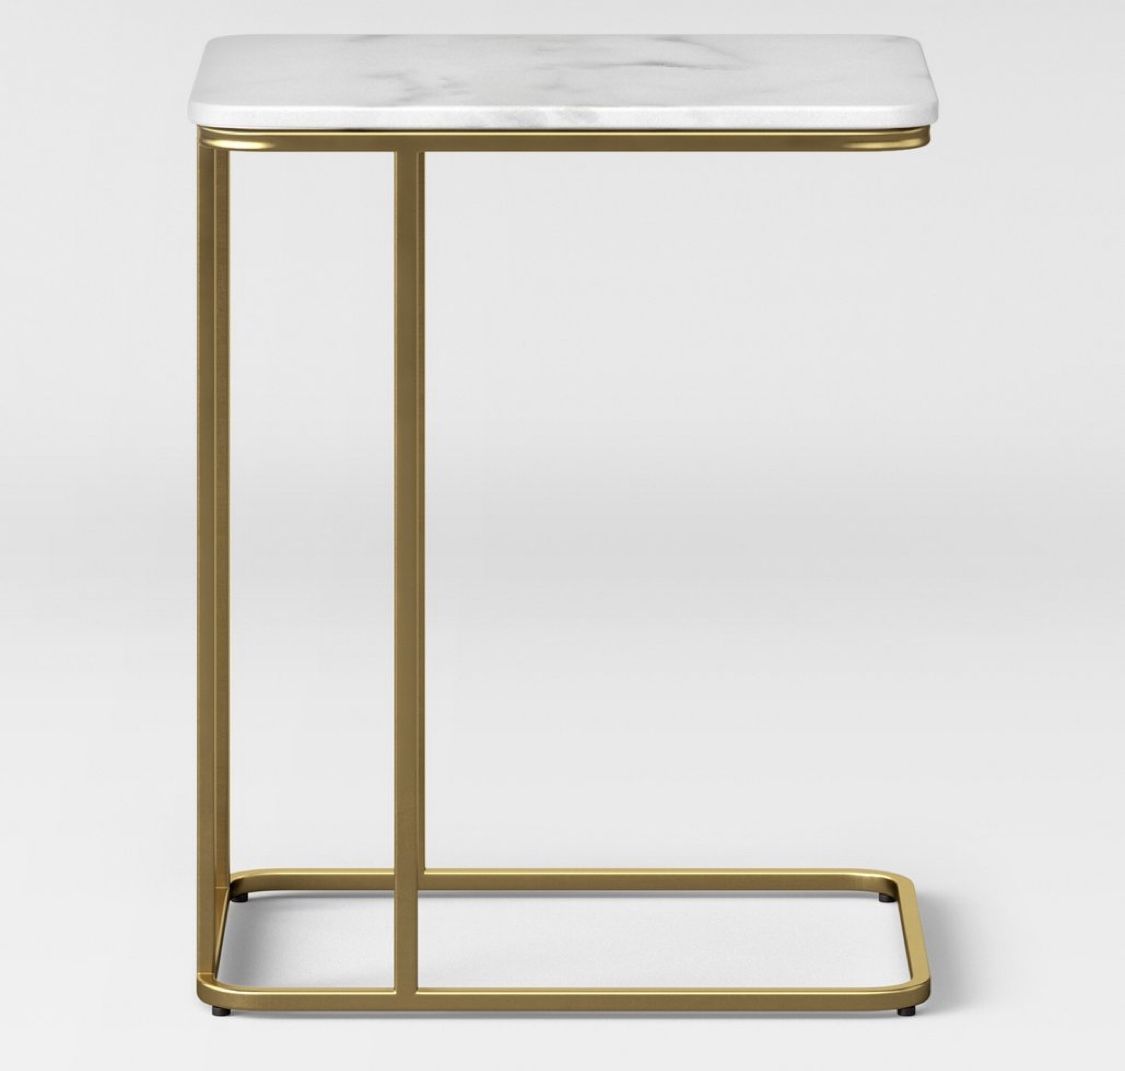 Brand new white marble C table project 62 (target)